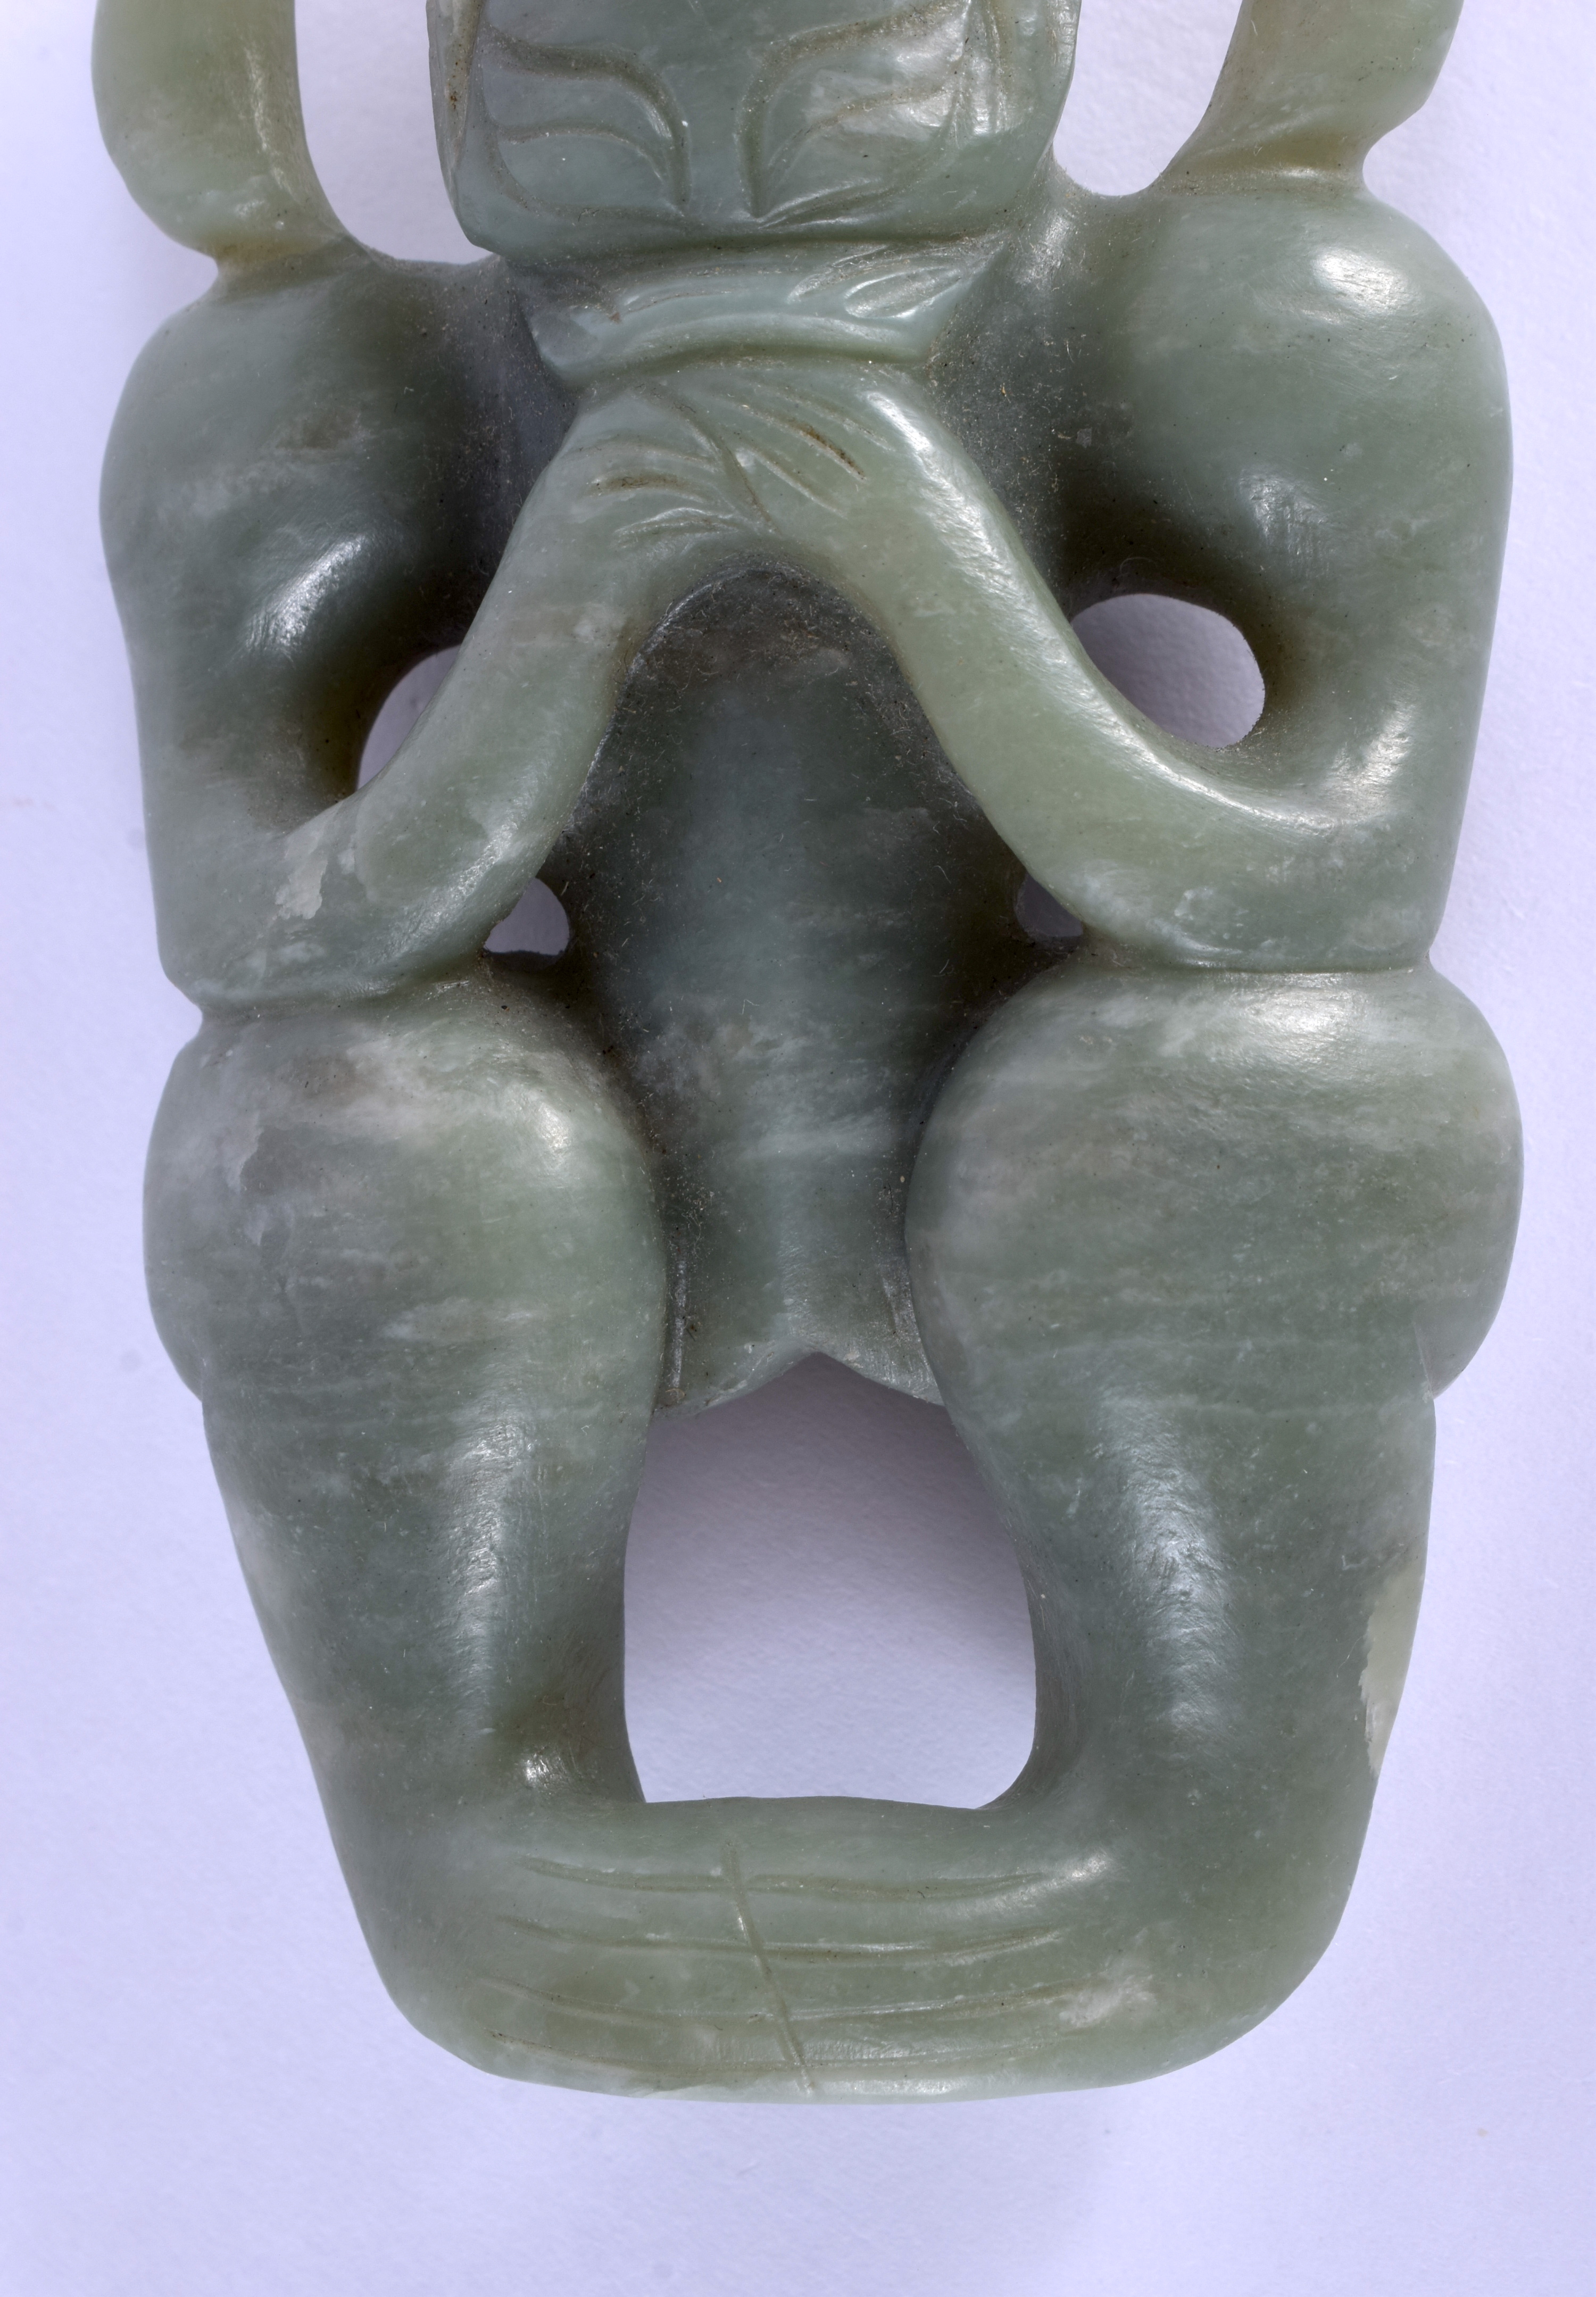 A CHINESE CARVED HONGSHAN CULTURE CARVED JADE FIGURE OF A SUN GOD possibly Neolithic period. 12 cm x - Image 9 of 11